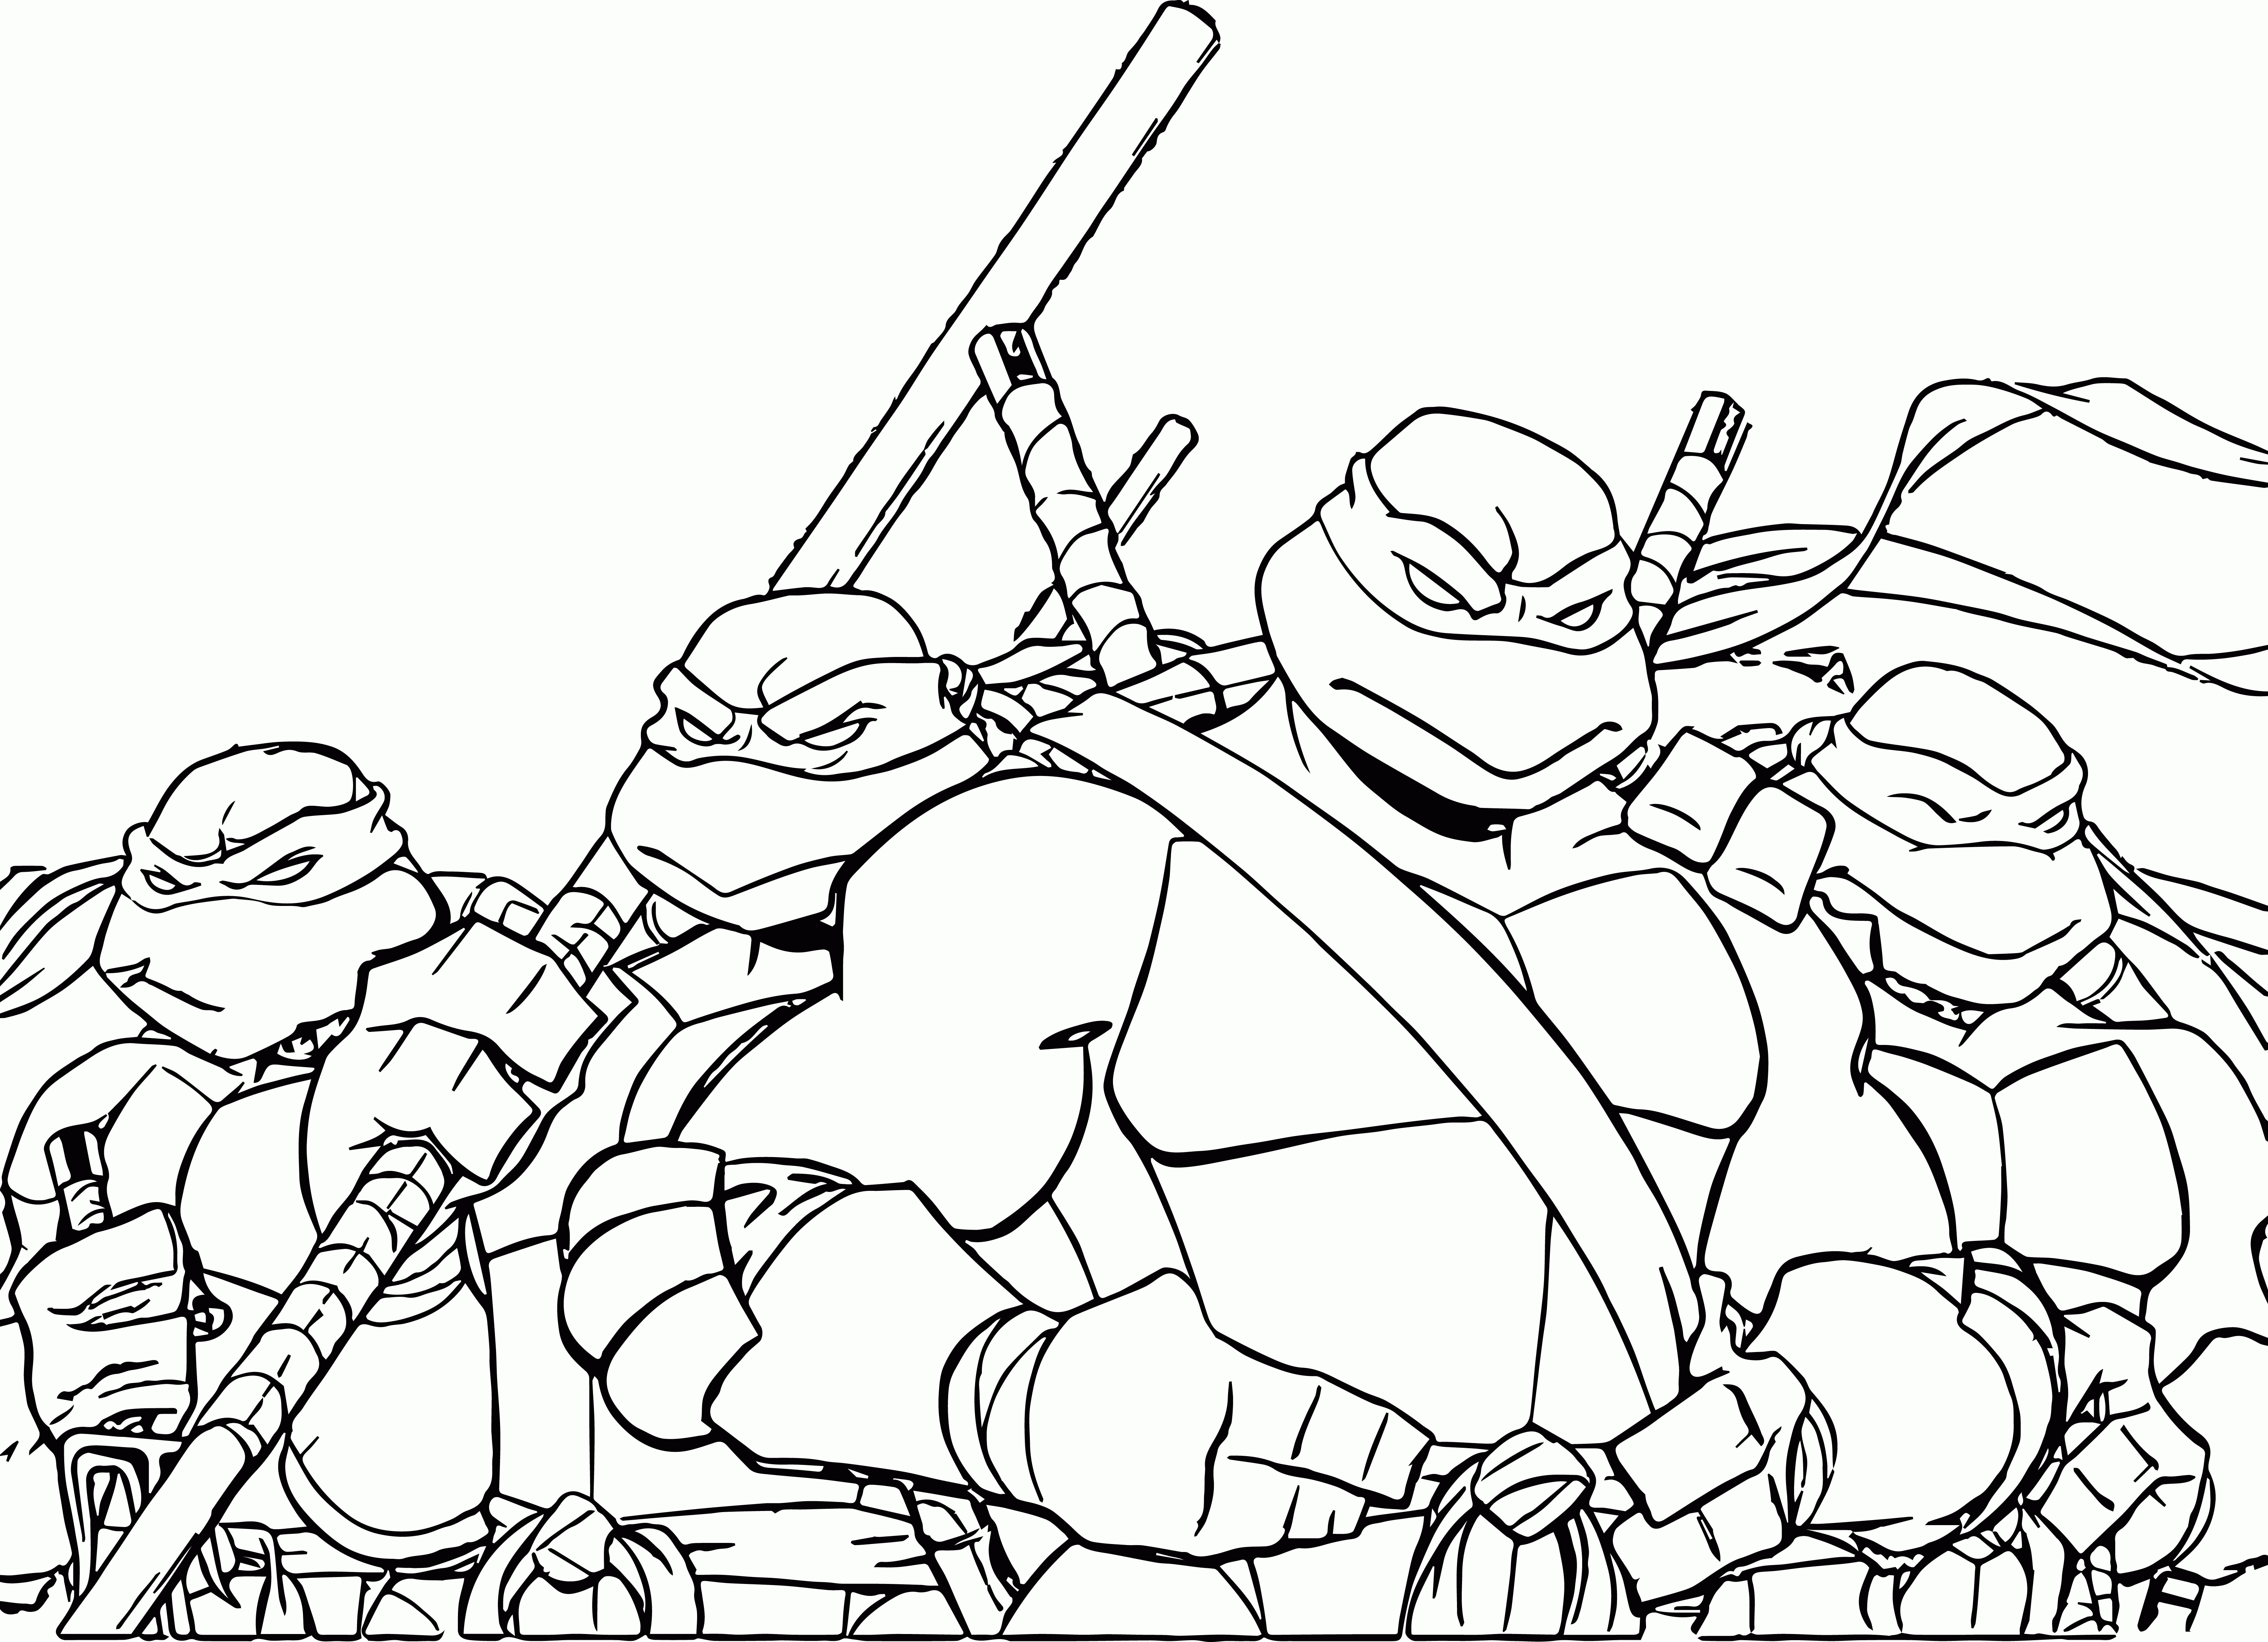 Army Ninja Coloring Pages - Coloring Home